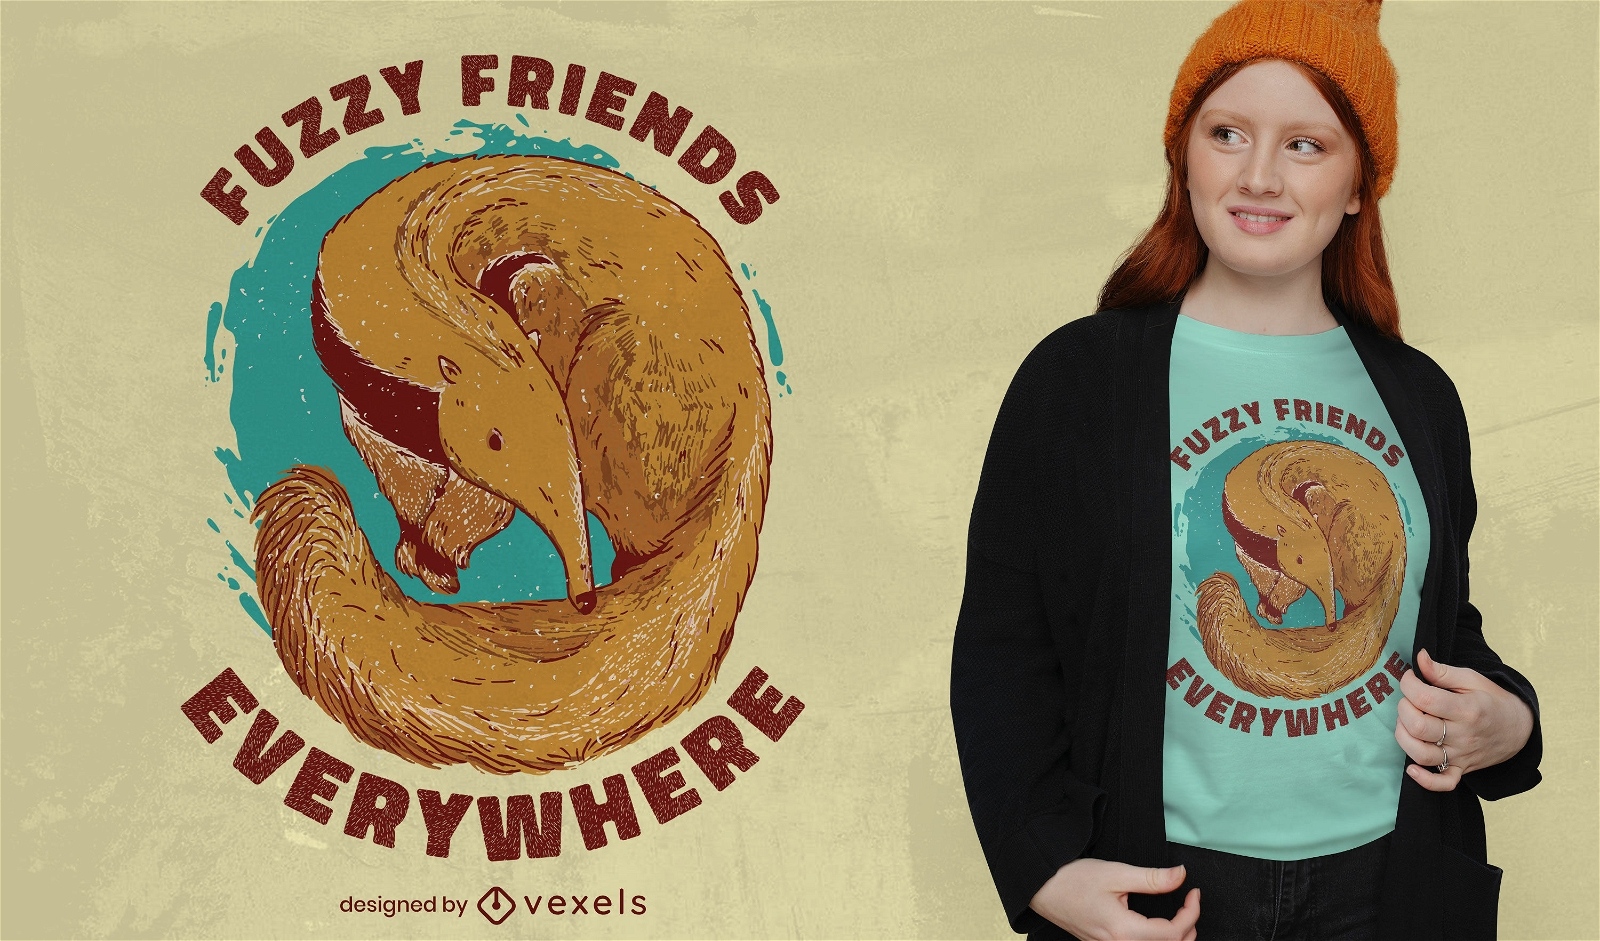 Cool fuzzy friends quote t-shirt design